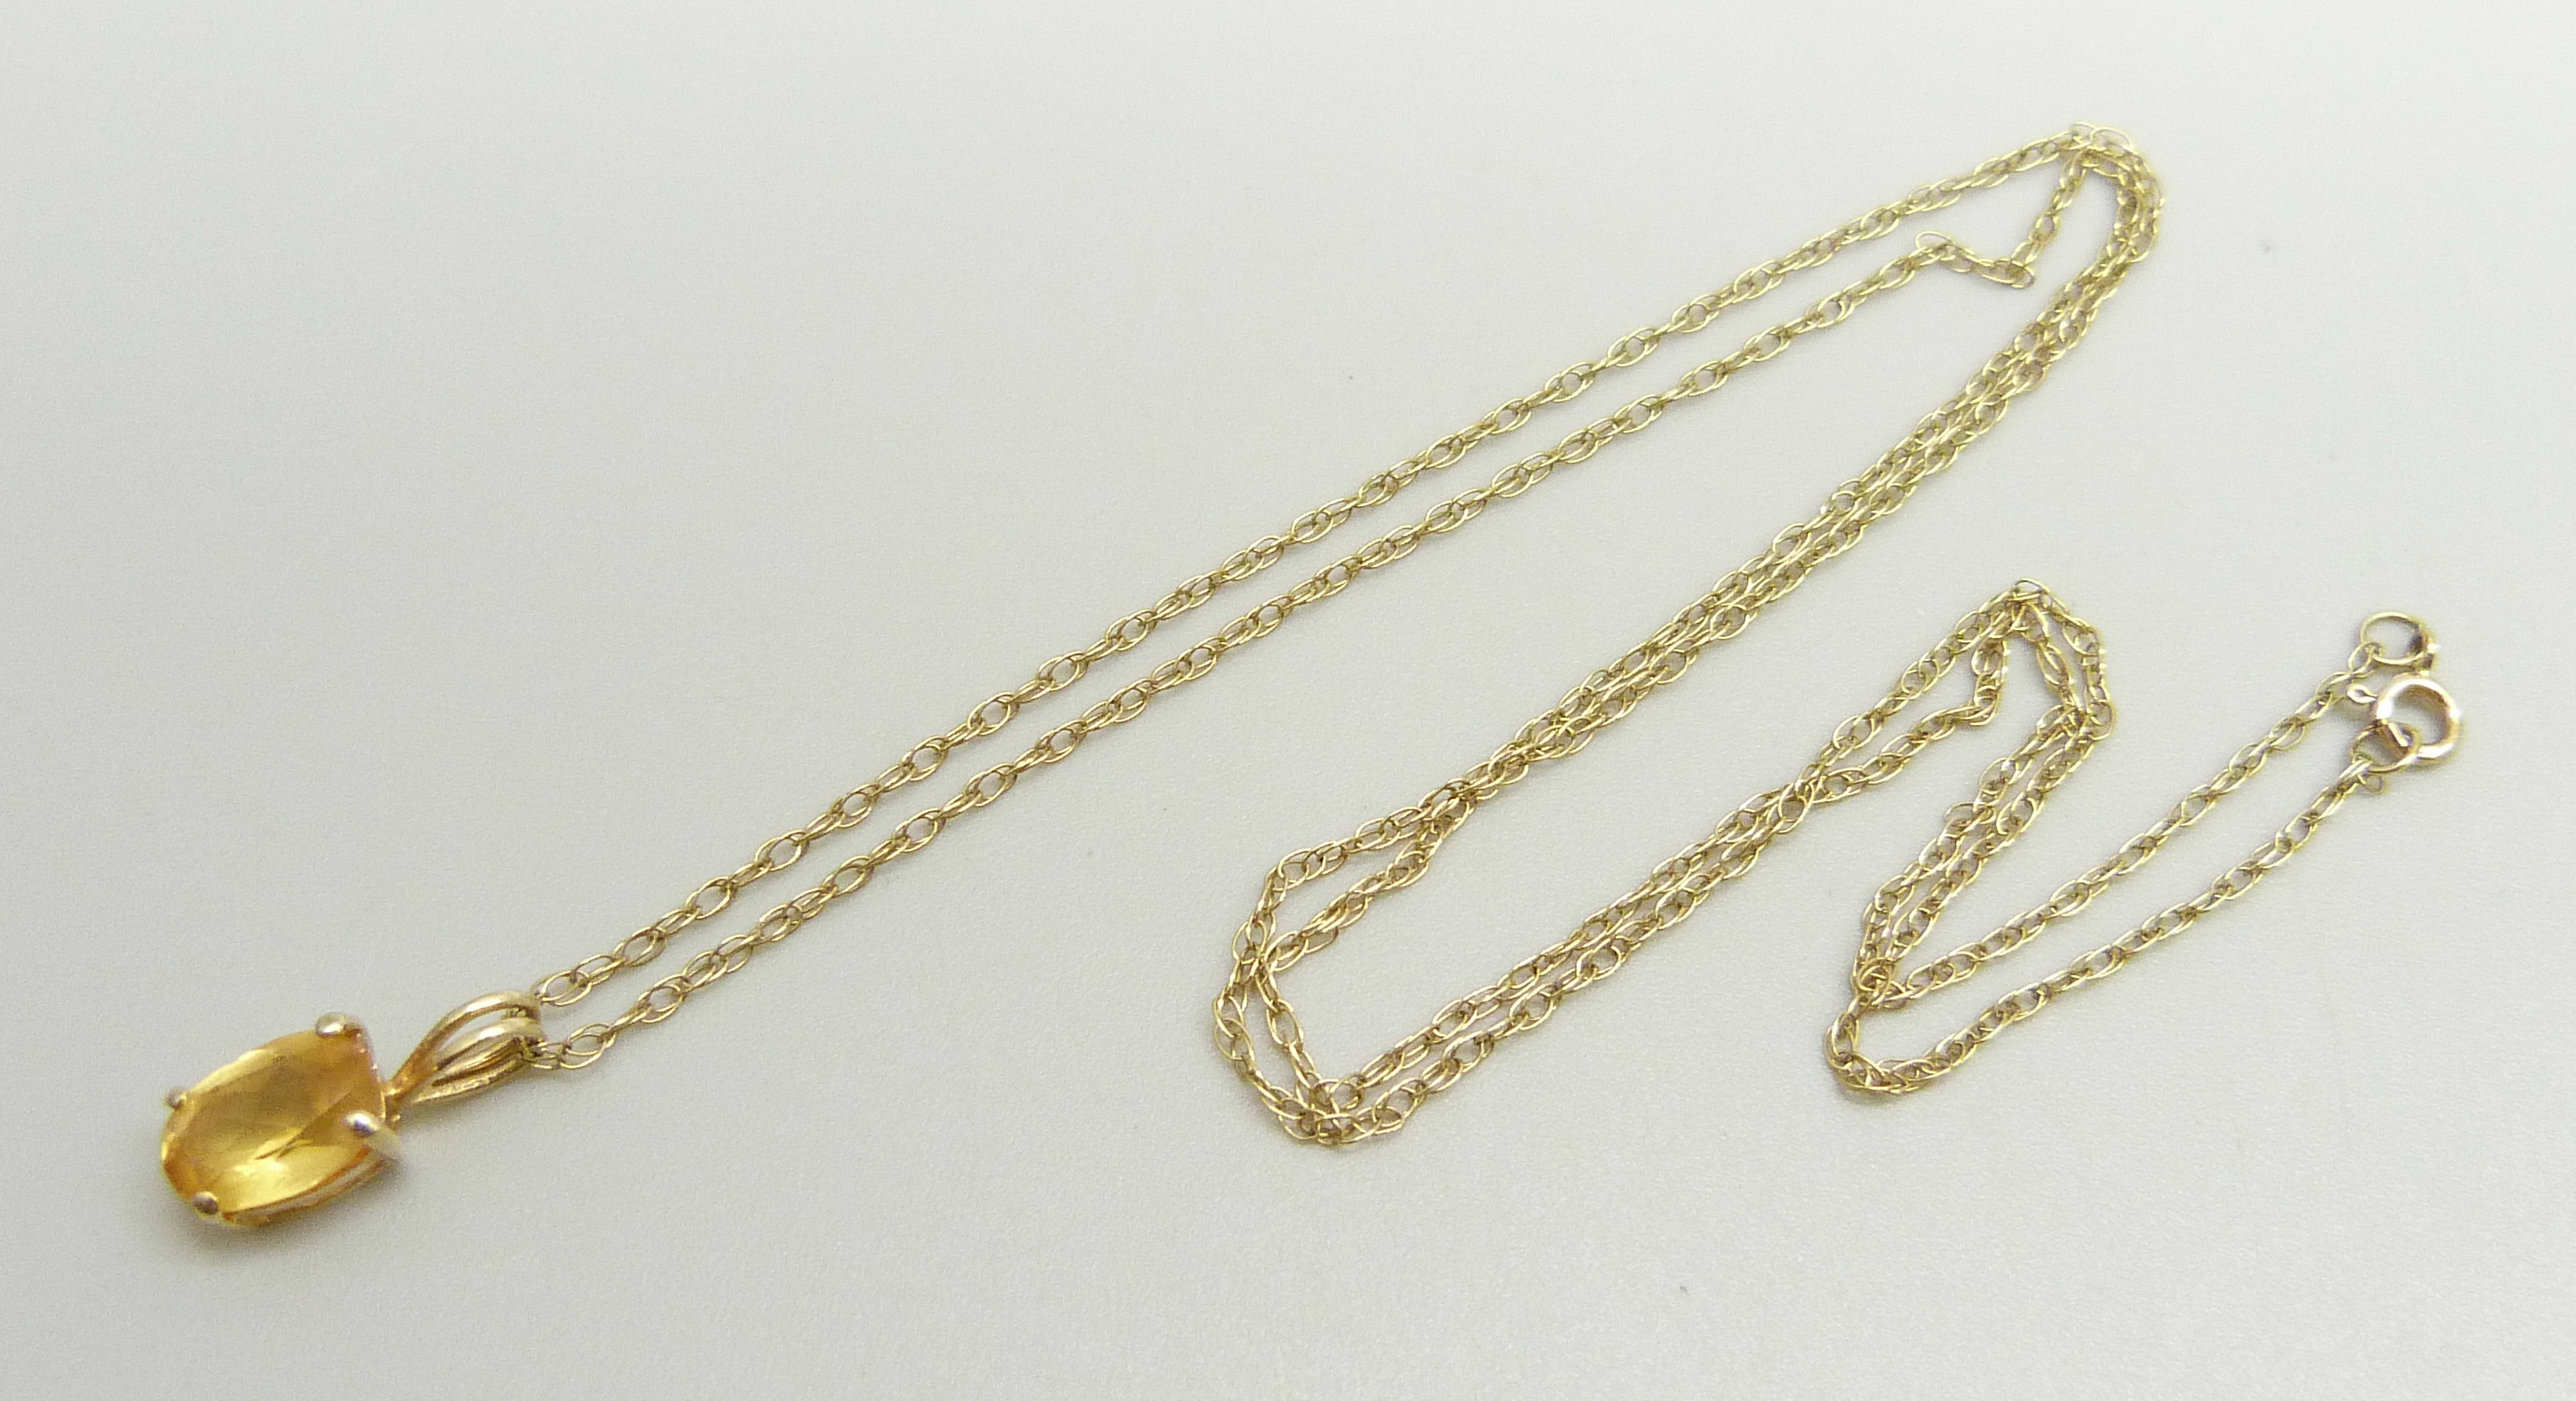 A 14ct gold pendant set with a citrine on a fine 9k gold chain, chain approximately 47cm, pendant